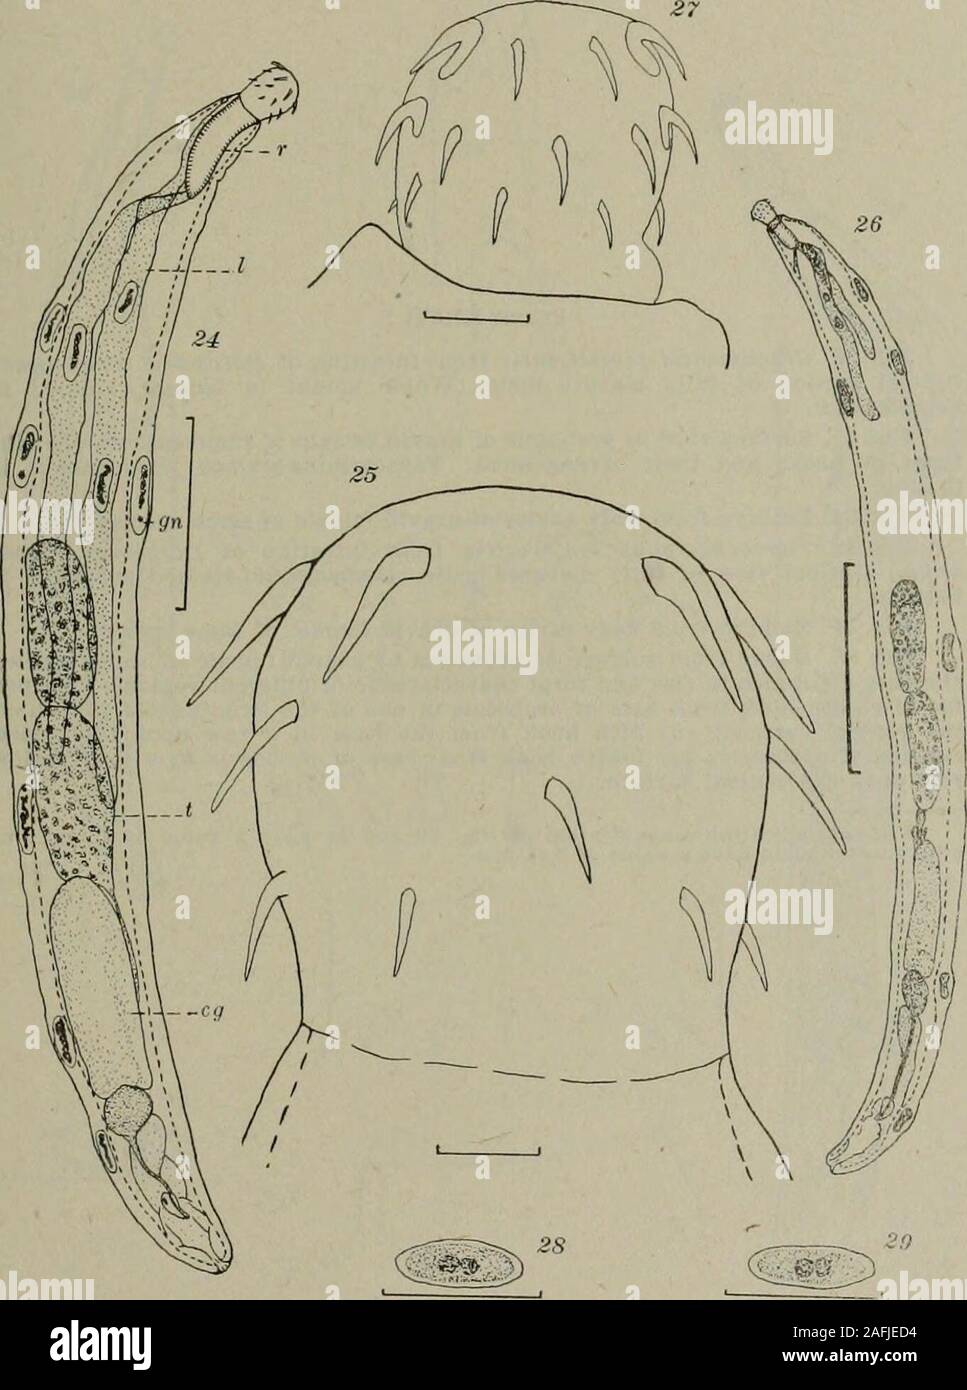 . Bulletin. Pl^TE XXVI * Fig. 24. Neoechinorhijnchus crassus. n. sp., from intestine of Catostomuscommersoiiii. Optical section of mature male, showing arrangement of internalorgans and relative thickness of body-wall. Hematoxylin-stained whole-mount indamar. Pig. 25. Surface view of proboscis of same individual. Fig. 26. Octospinifer macilentus, n. sp., from intestine of Catostomus com-mersonii. Optical section of mature male. From hematoxylin-stained whole-mount in damar. Fig. 27. Surface view of proboscis of same individual. Fig. 28. NeoecMnorhynchus crassus. Embryo from body-cavity of grav Stock Photo